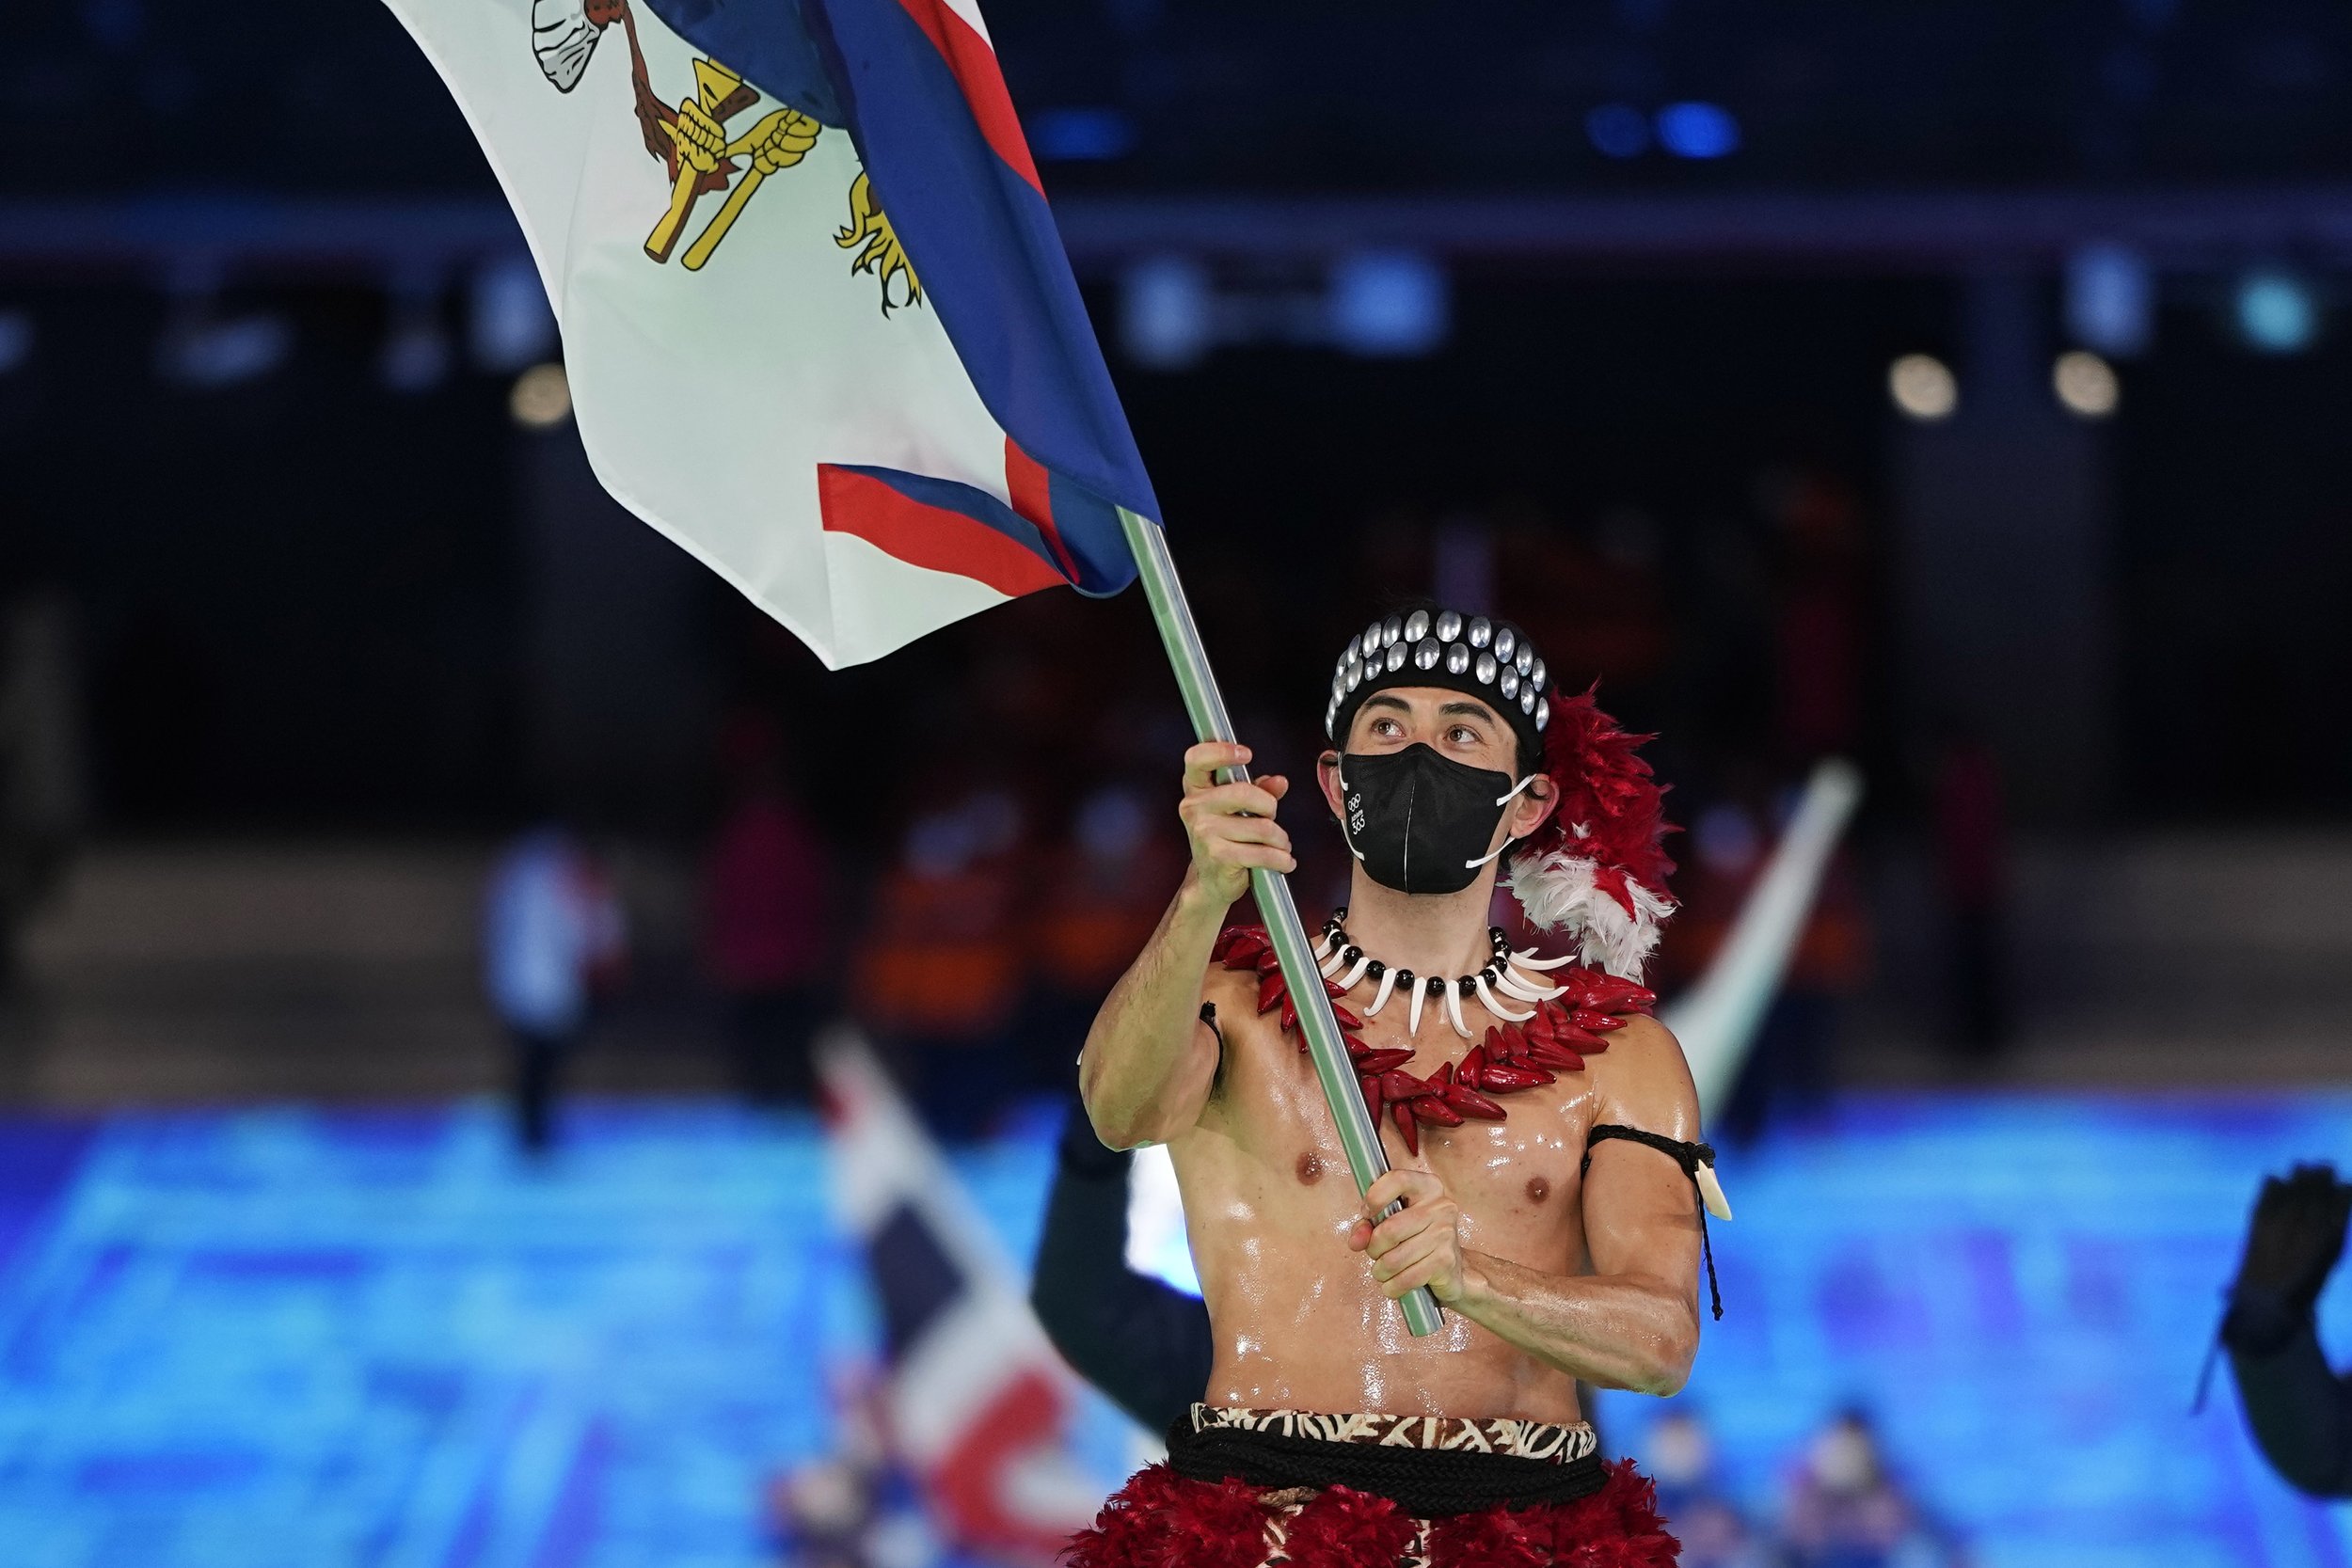  Nathan Crumpton, of American Samoa, carries his national flag into the stadium during the opening ceremony of the 2022 Winter Olympics, Friday, Feb. 4, 2022, in Beijing. (AP Photo/Jae C. Hong) 